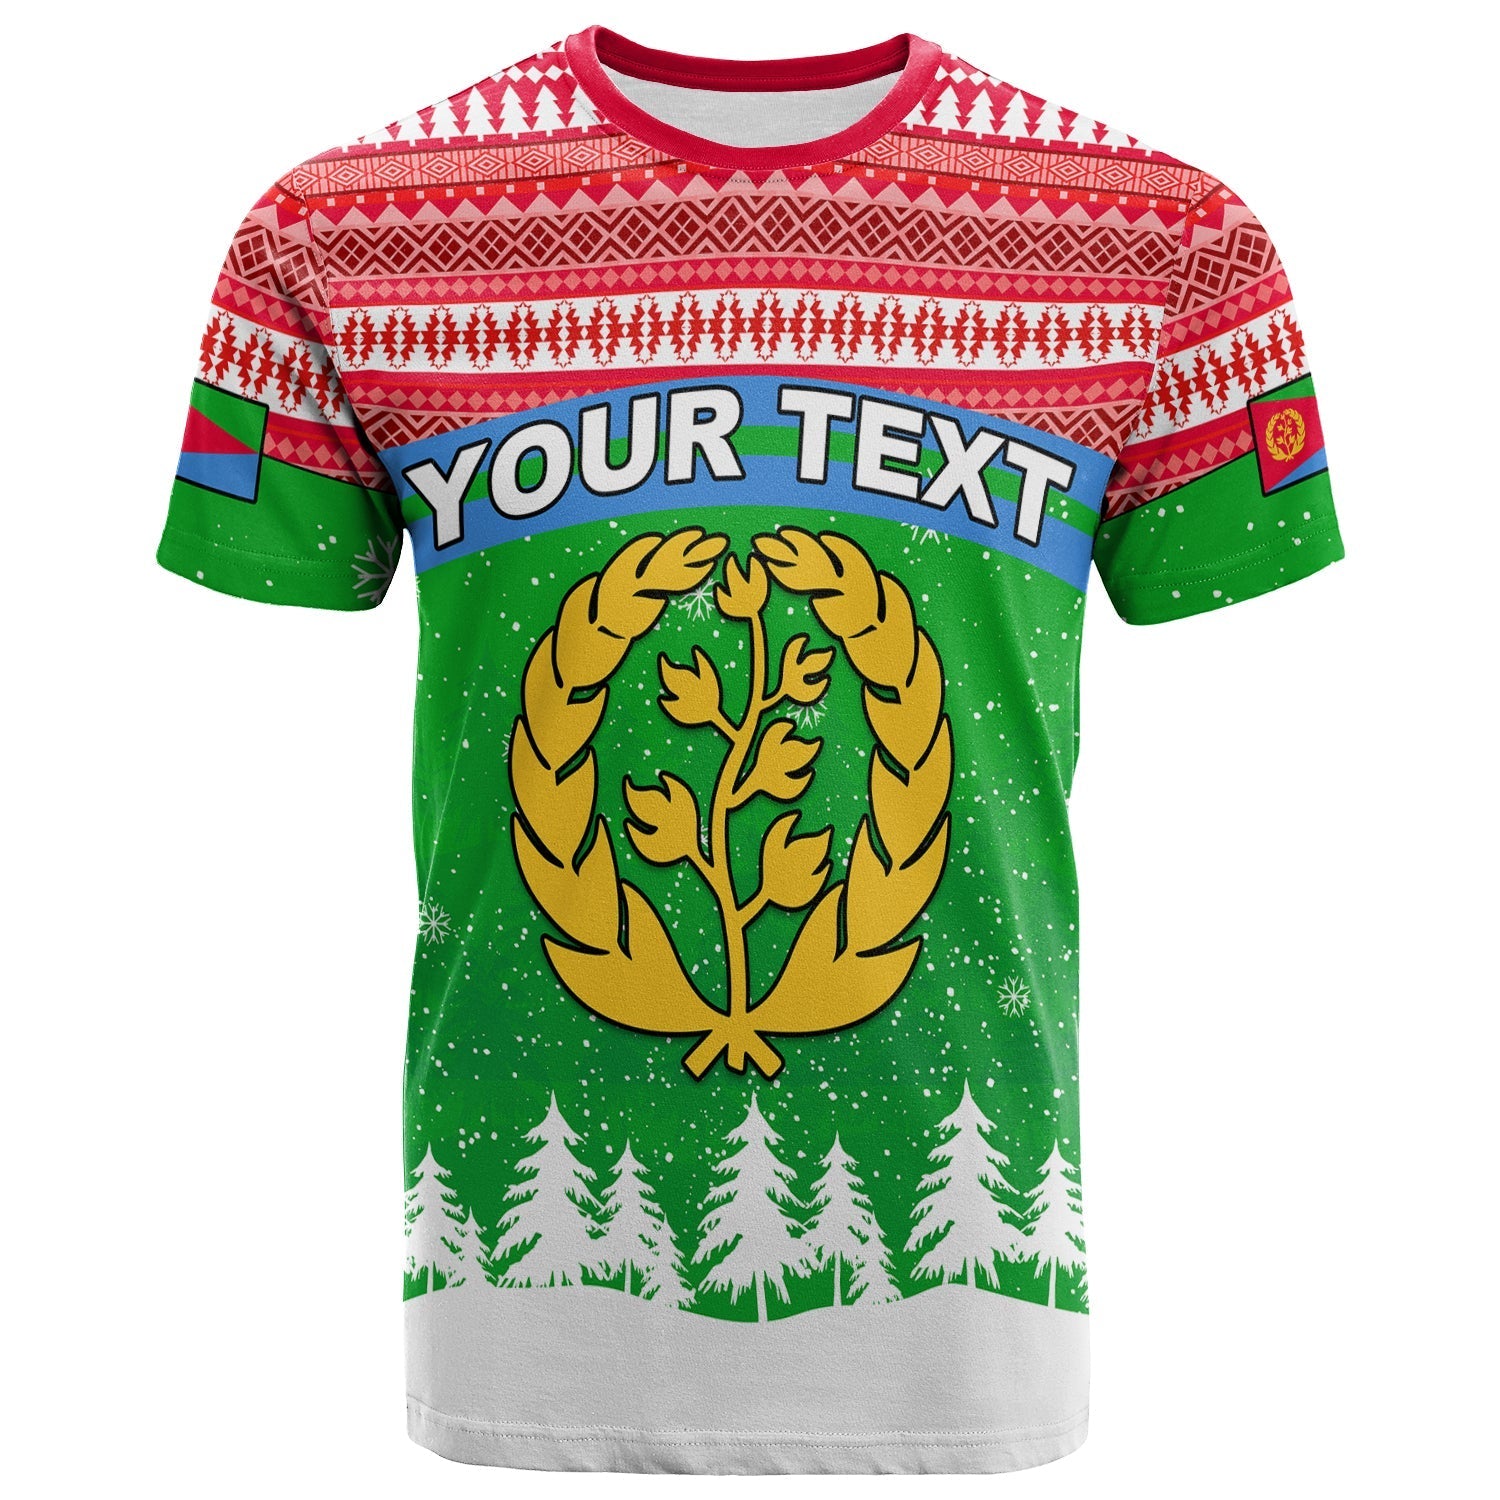 custom-personalised-eritrea-t-shirt-merry-christmas-mix-african-pattern